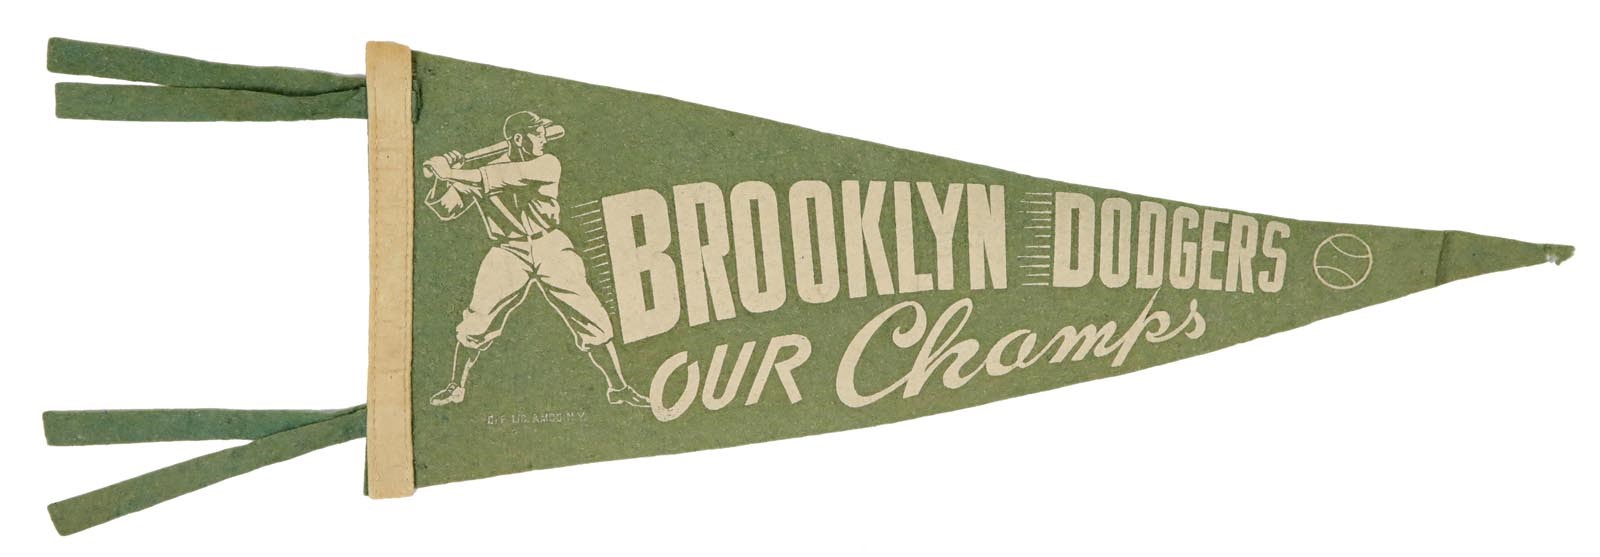 - 1947 Brooklyn Dodgers "Our Champs" Pennant